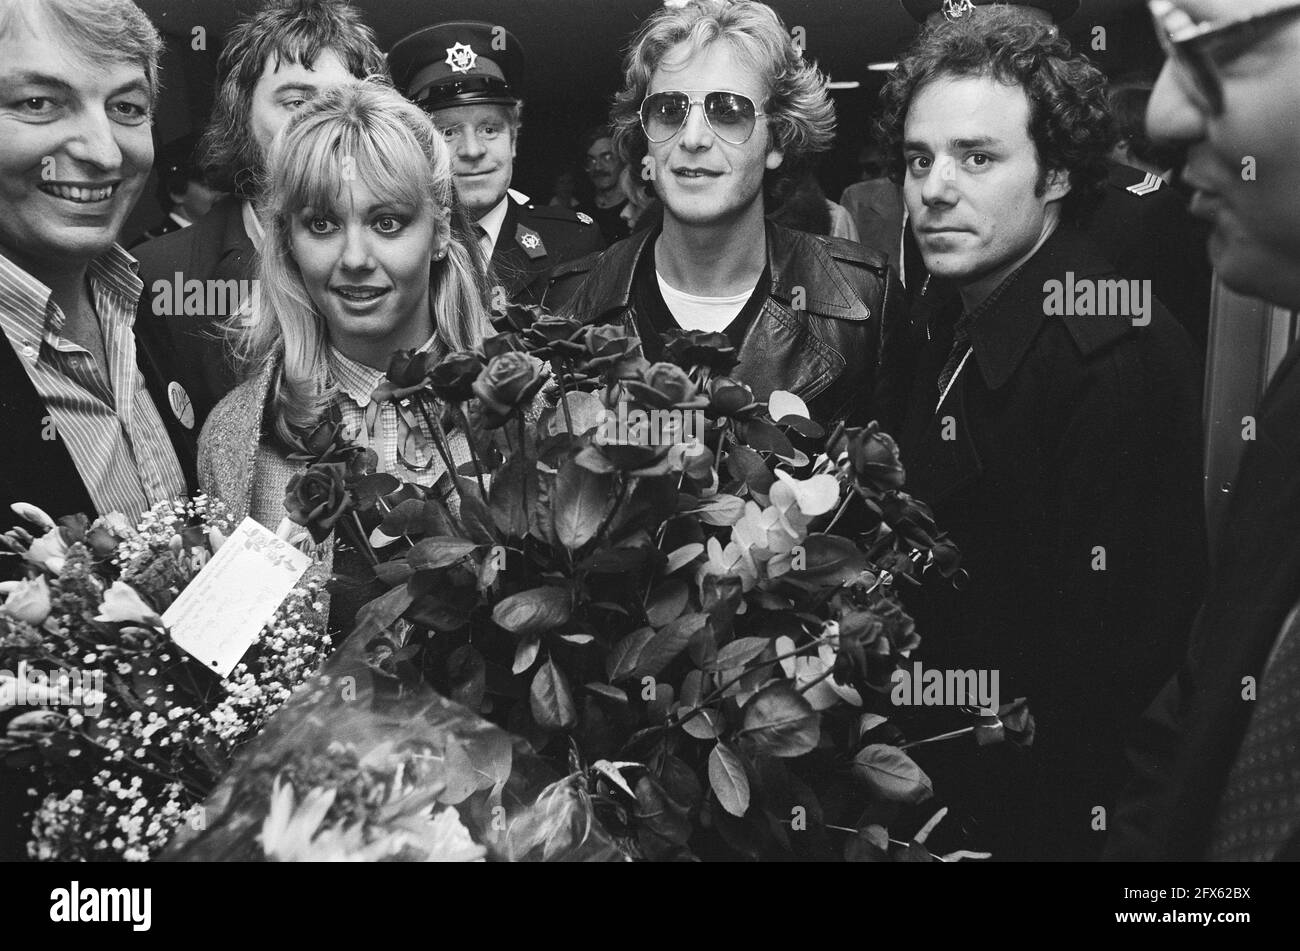 Arrival of singer Olivia Newton John at Schiphol Airport; Olivia Newton John with flowers, November 24, 1978, FLOWERS, arrivals, singers, The Netherlands, 20th century press agency photo, news to remember, documentary, historic photography 1945-1990, visual stories, human history of the Twentieth Century, capturing moments in time Stock Photo